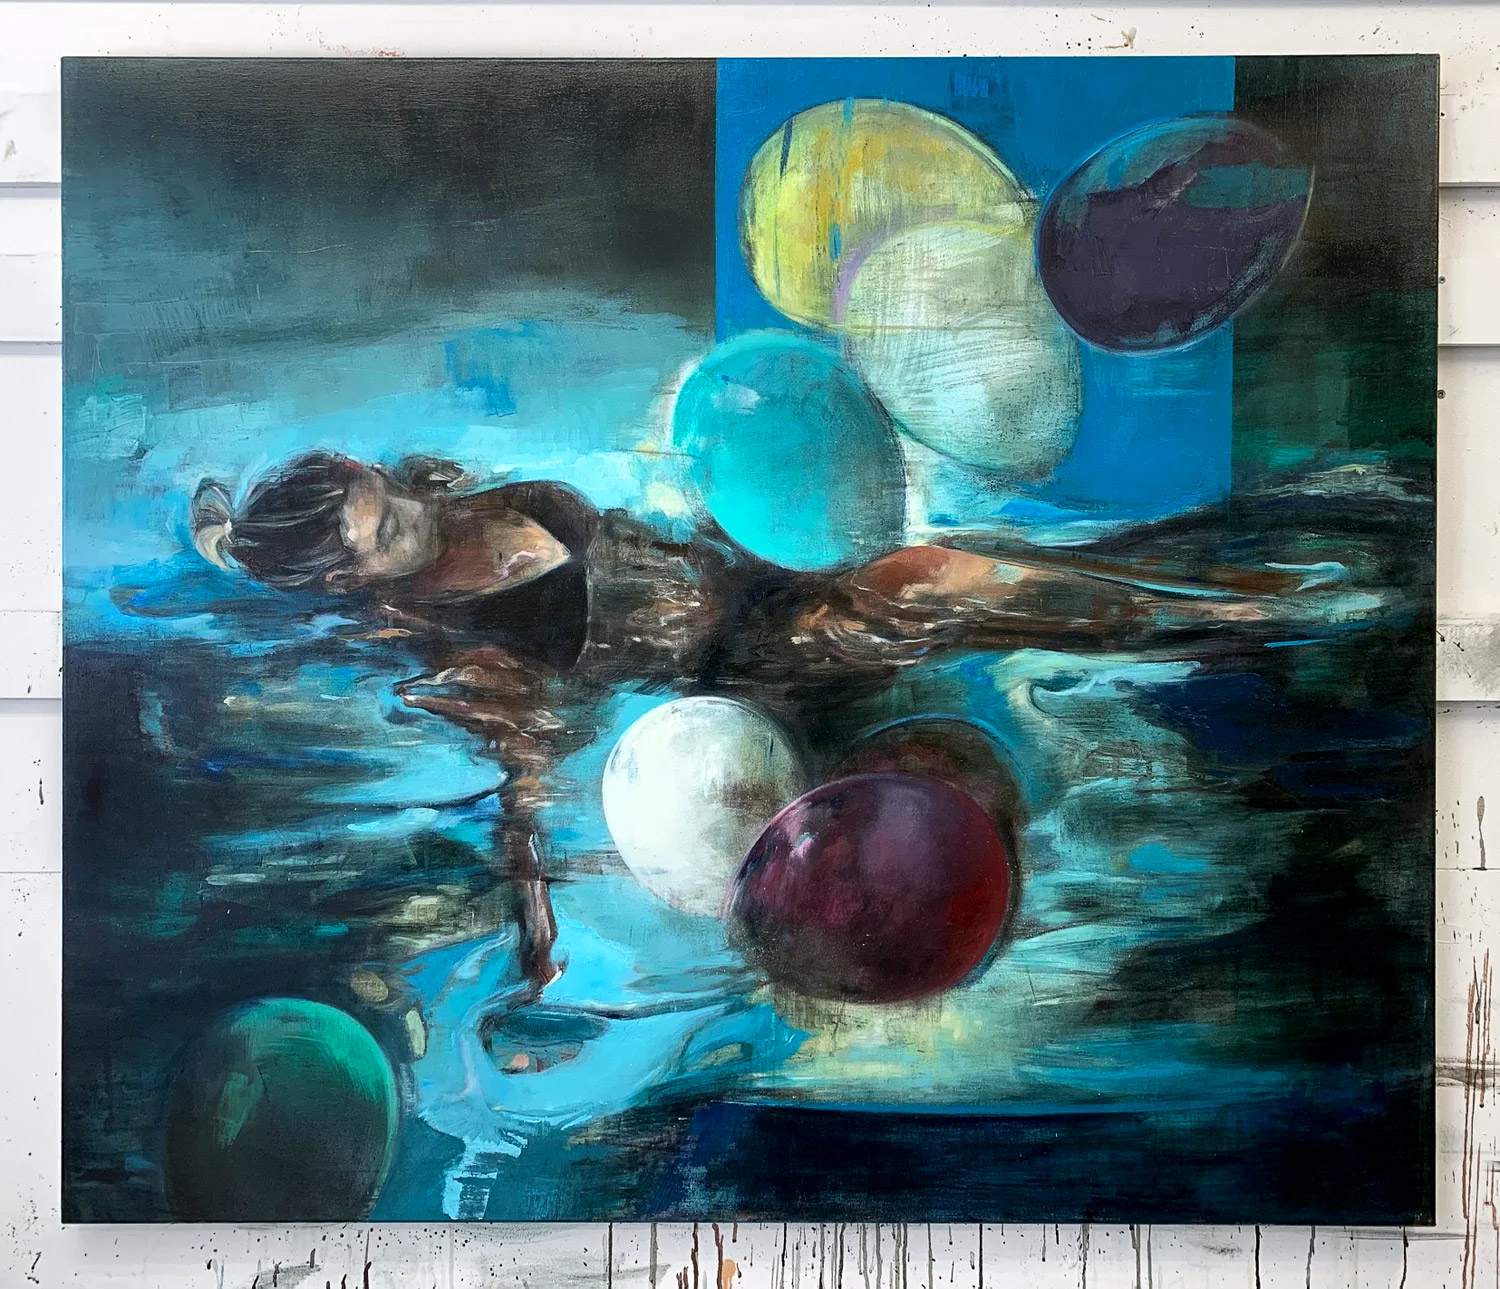 paintings, colorful, figurative, graphical, portraiture, bodies, nature, oceans, people, blue, turquoise, acrylic, flax-canvas, oil, beautiful, contemporary-art, danish, decorative, design, interior, interior-design, modern, modern-art, nordic, pretty, scandinavien, summer, Buy original high quality art. Paintings, drawings, limited edition prints & posters by talented artists.